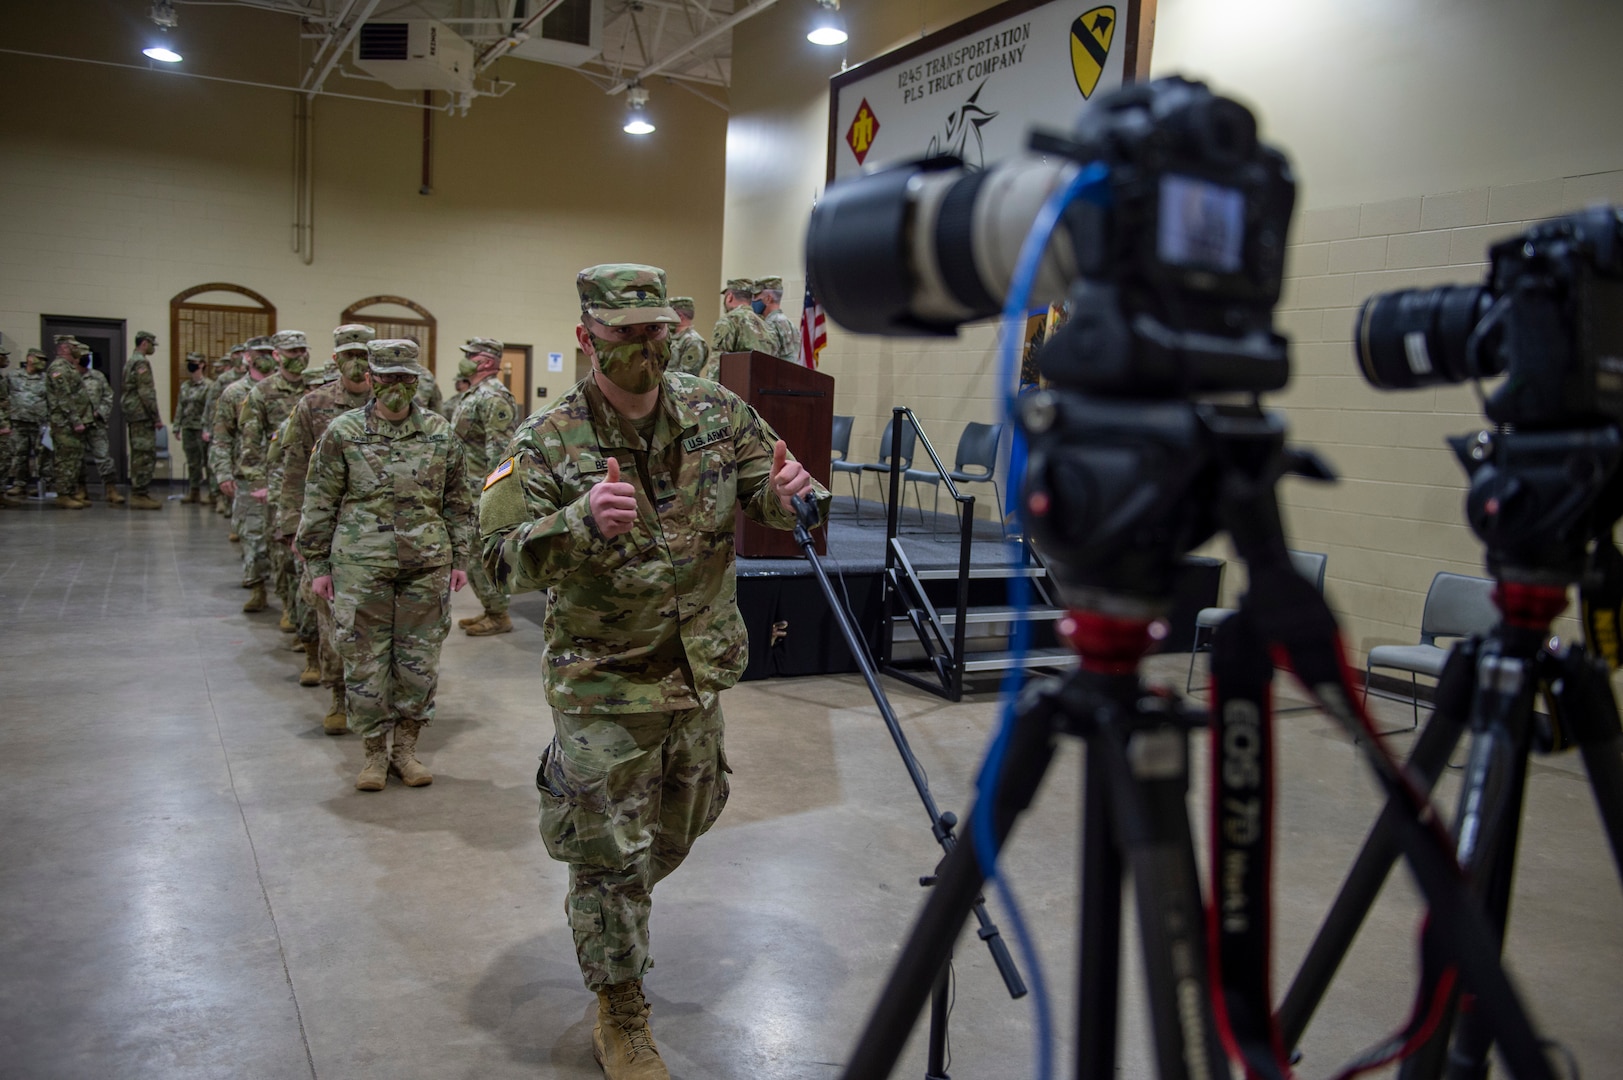 A Soldier with the 345th Combat Sustainment Support Battalion gives a "thumbs up" gesture to cameras broadcasting a virtual send-off ceremony at the National Guard armory in Ada, Oklahoma, April 1, 2021. The Soldiers are being mobilized to Fort Bliss, Texas in order to provide COVID mitigation support to units deploying overseas. (Oklahoma National Guard photo by Leanna Maschino)